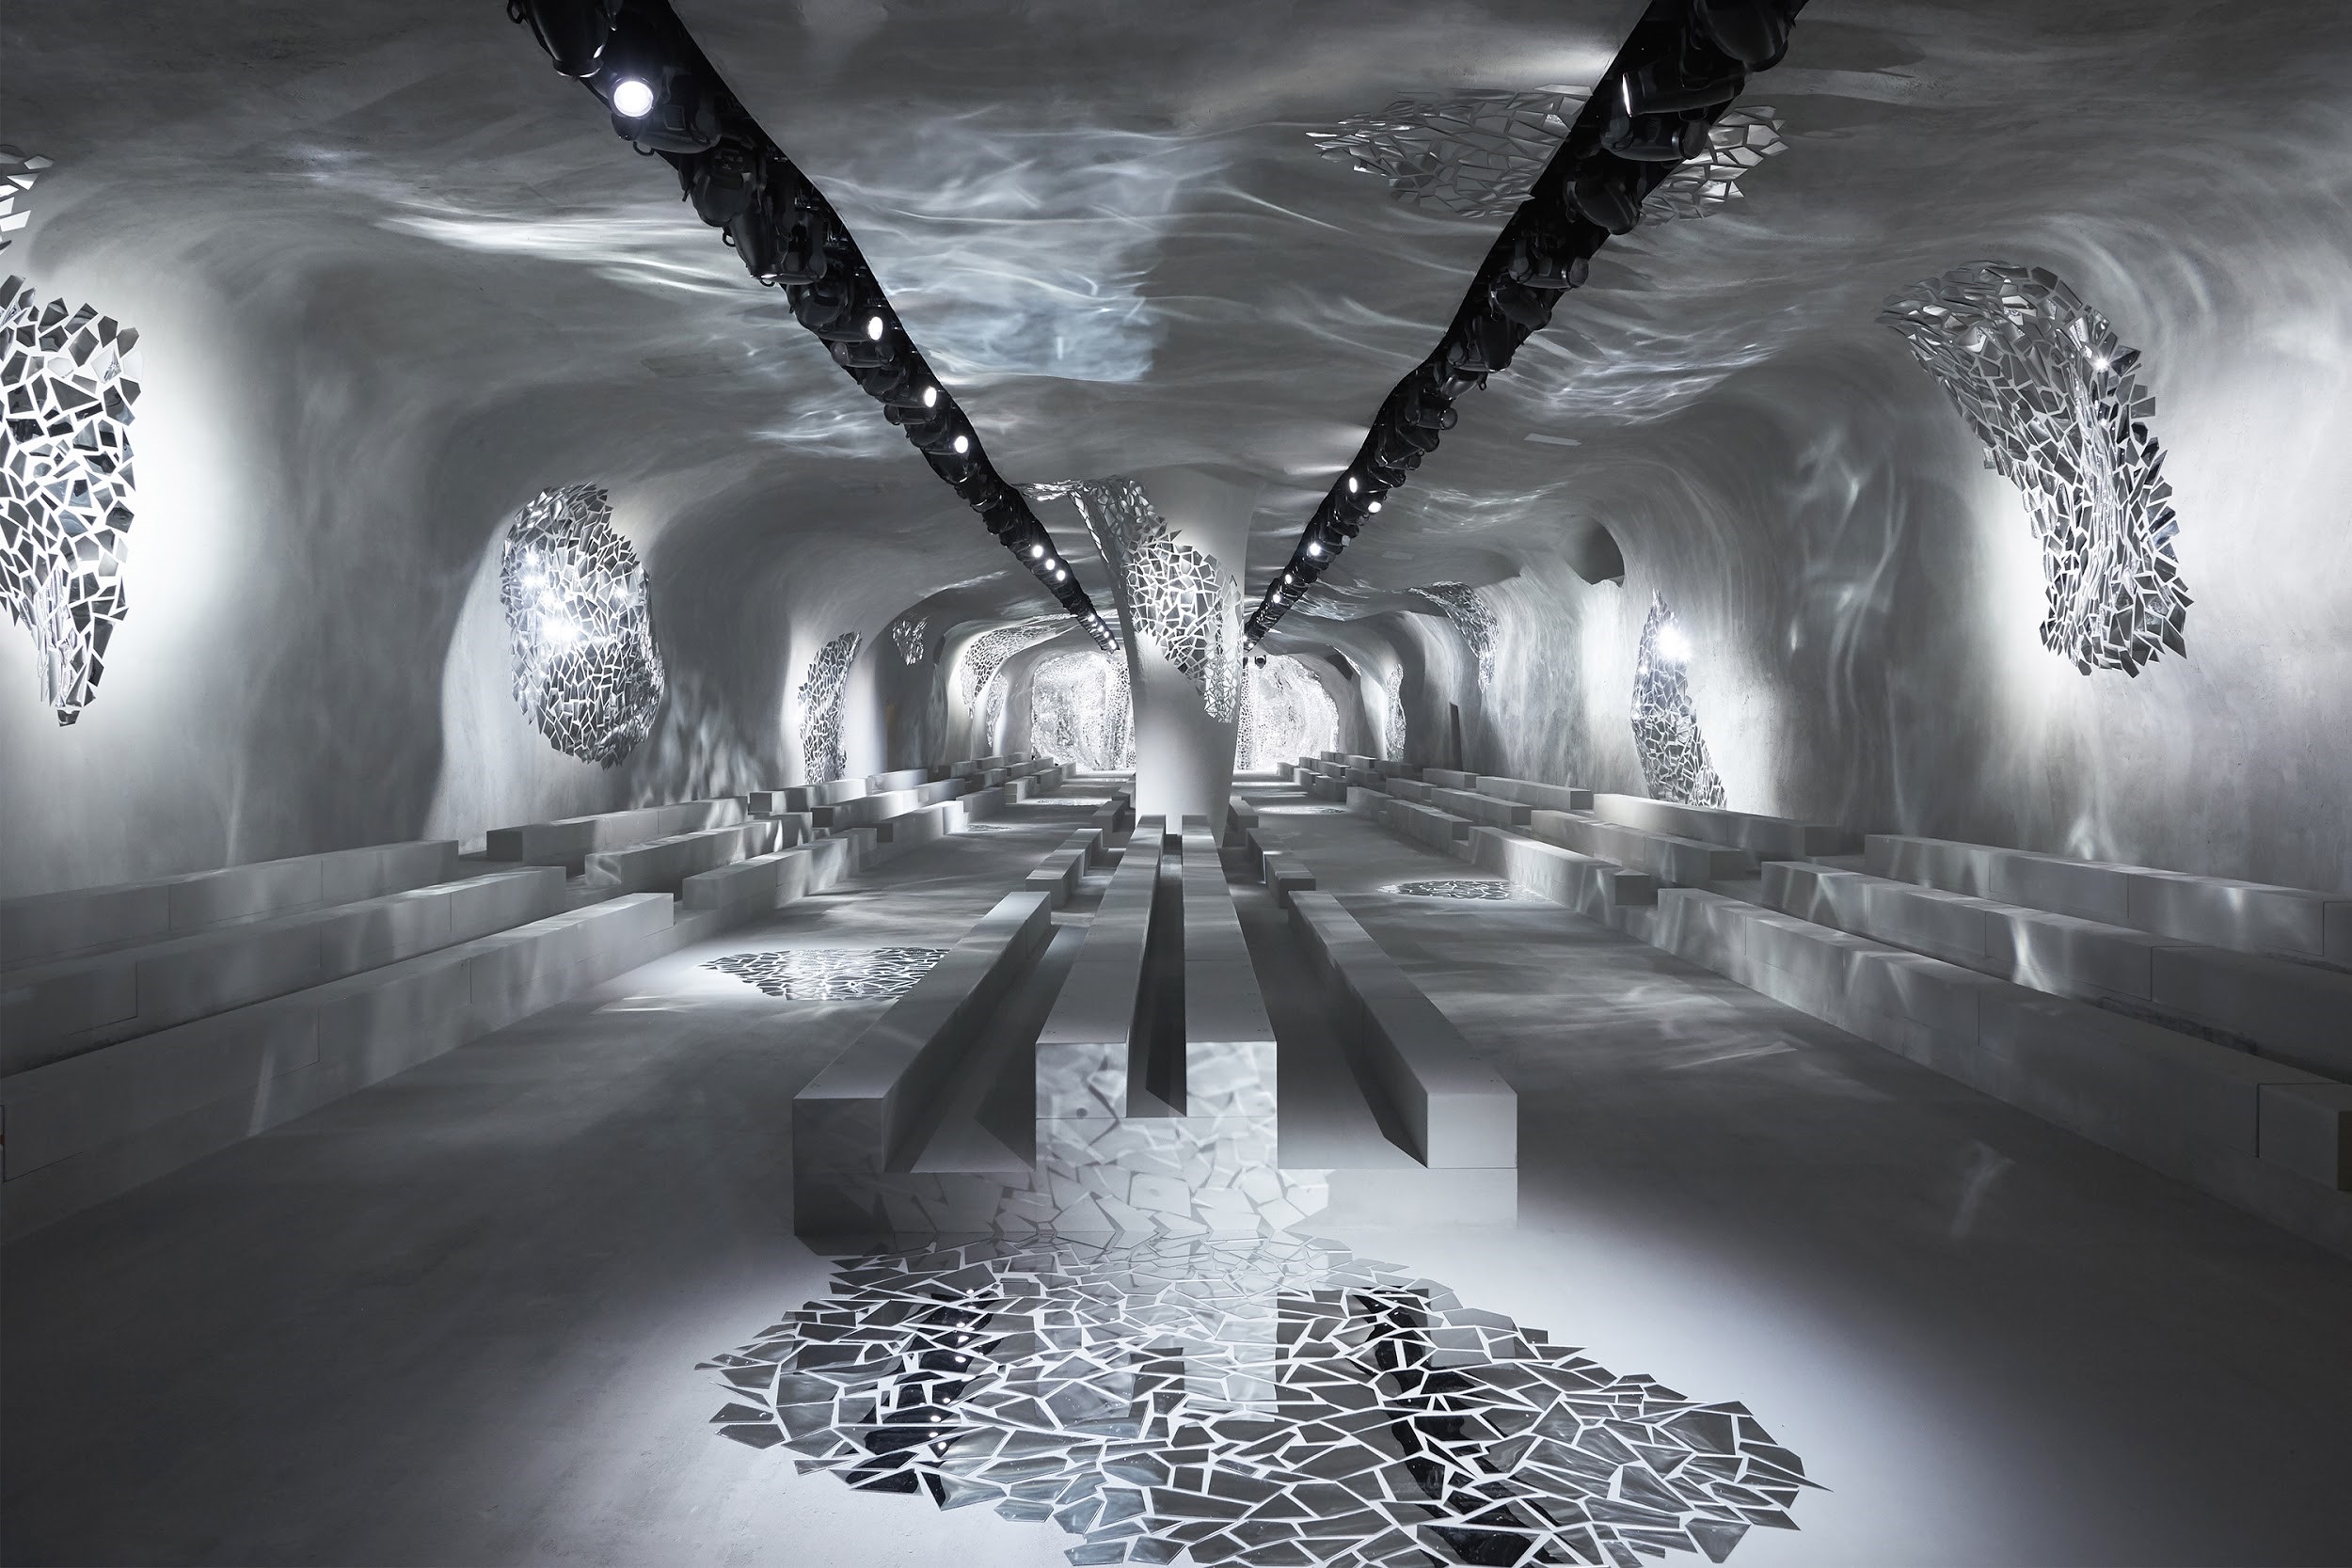 The seats for the guests to sit were continuous and integrated into space. (Photo: reproduced from Dior website)